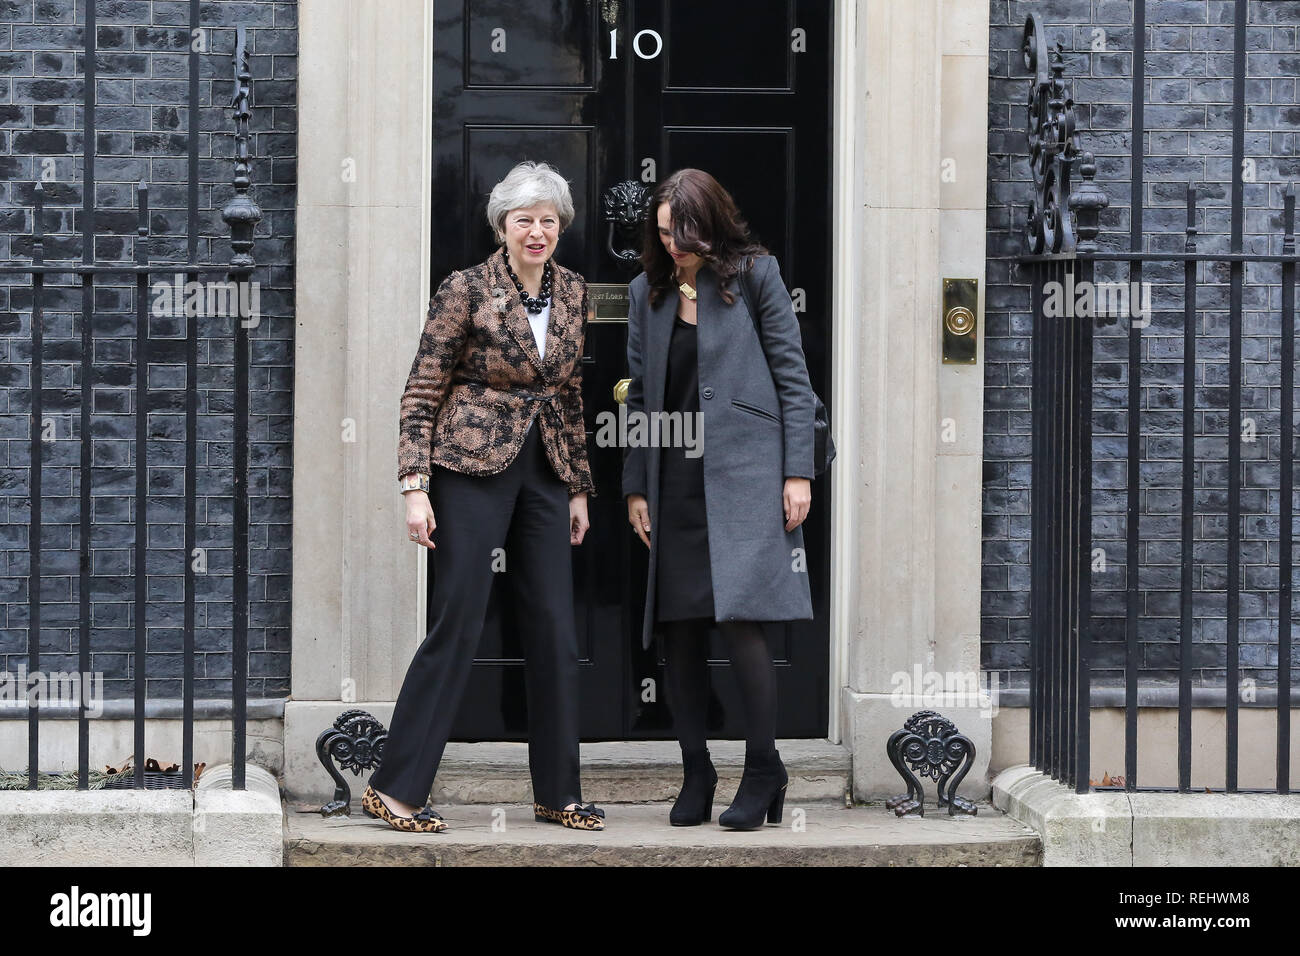 British Prime Minister Theresa May (L) is seen with the New Zealand Prime Minister Jacinda Ardern (R) outside the No 10 Downing Street. Stock Photo